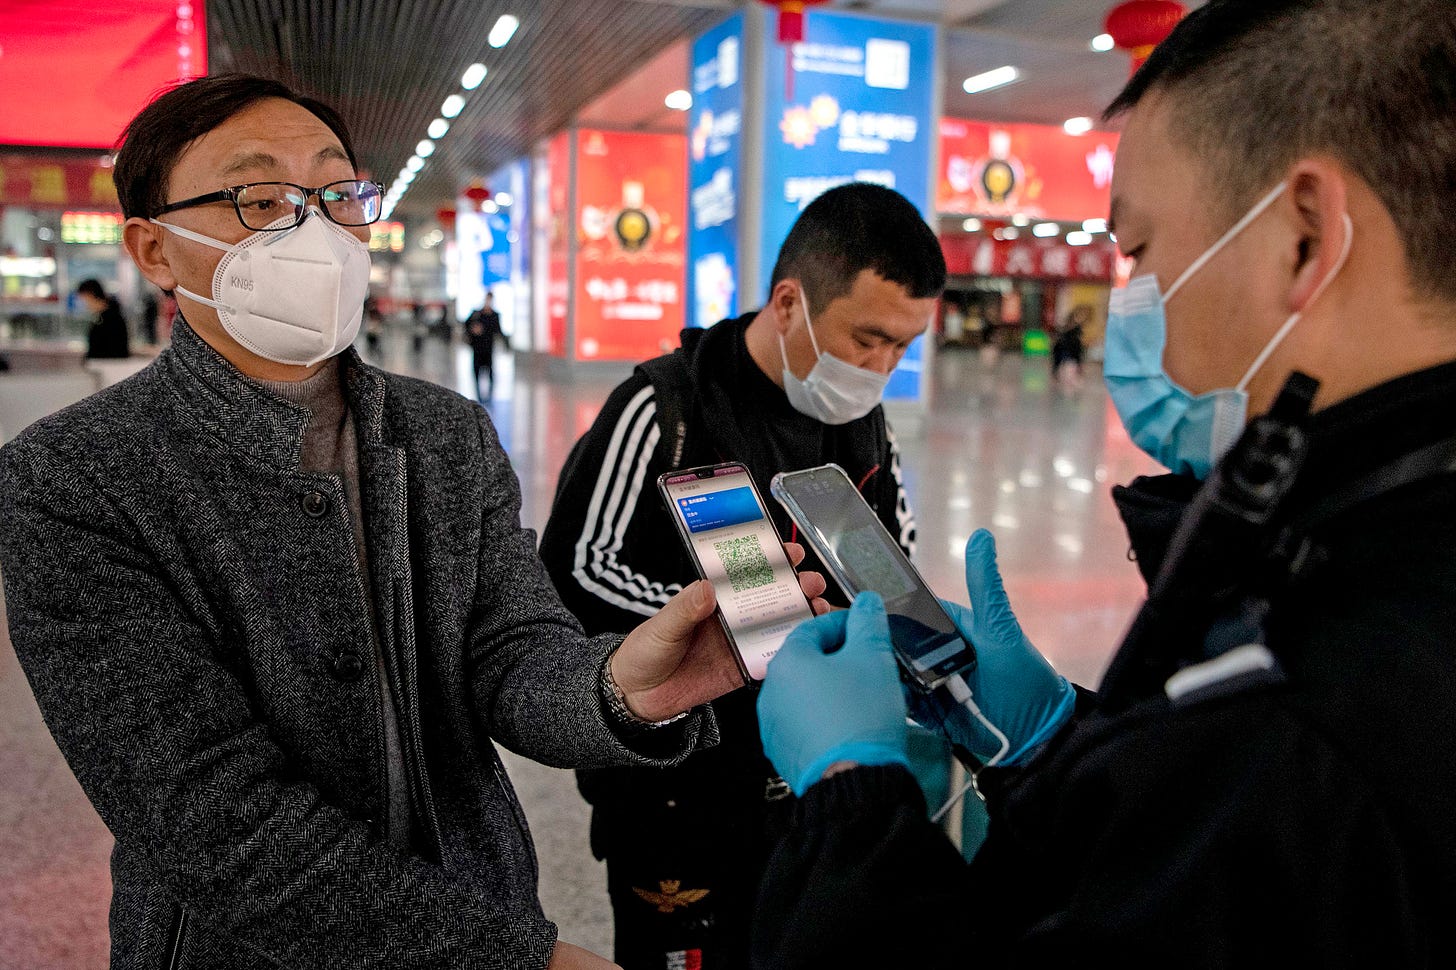 China's coronavirus-tracking apps use color codes to rate people's COVID-19  level, need for quarantine | Fortune